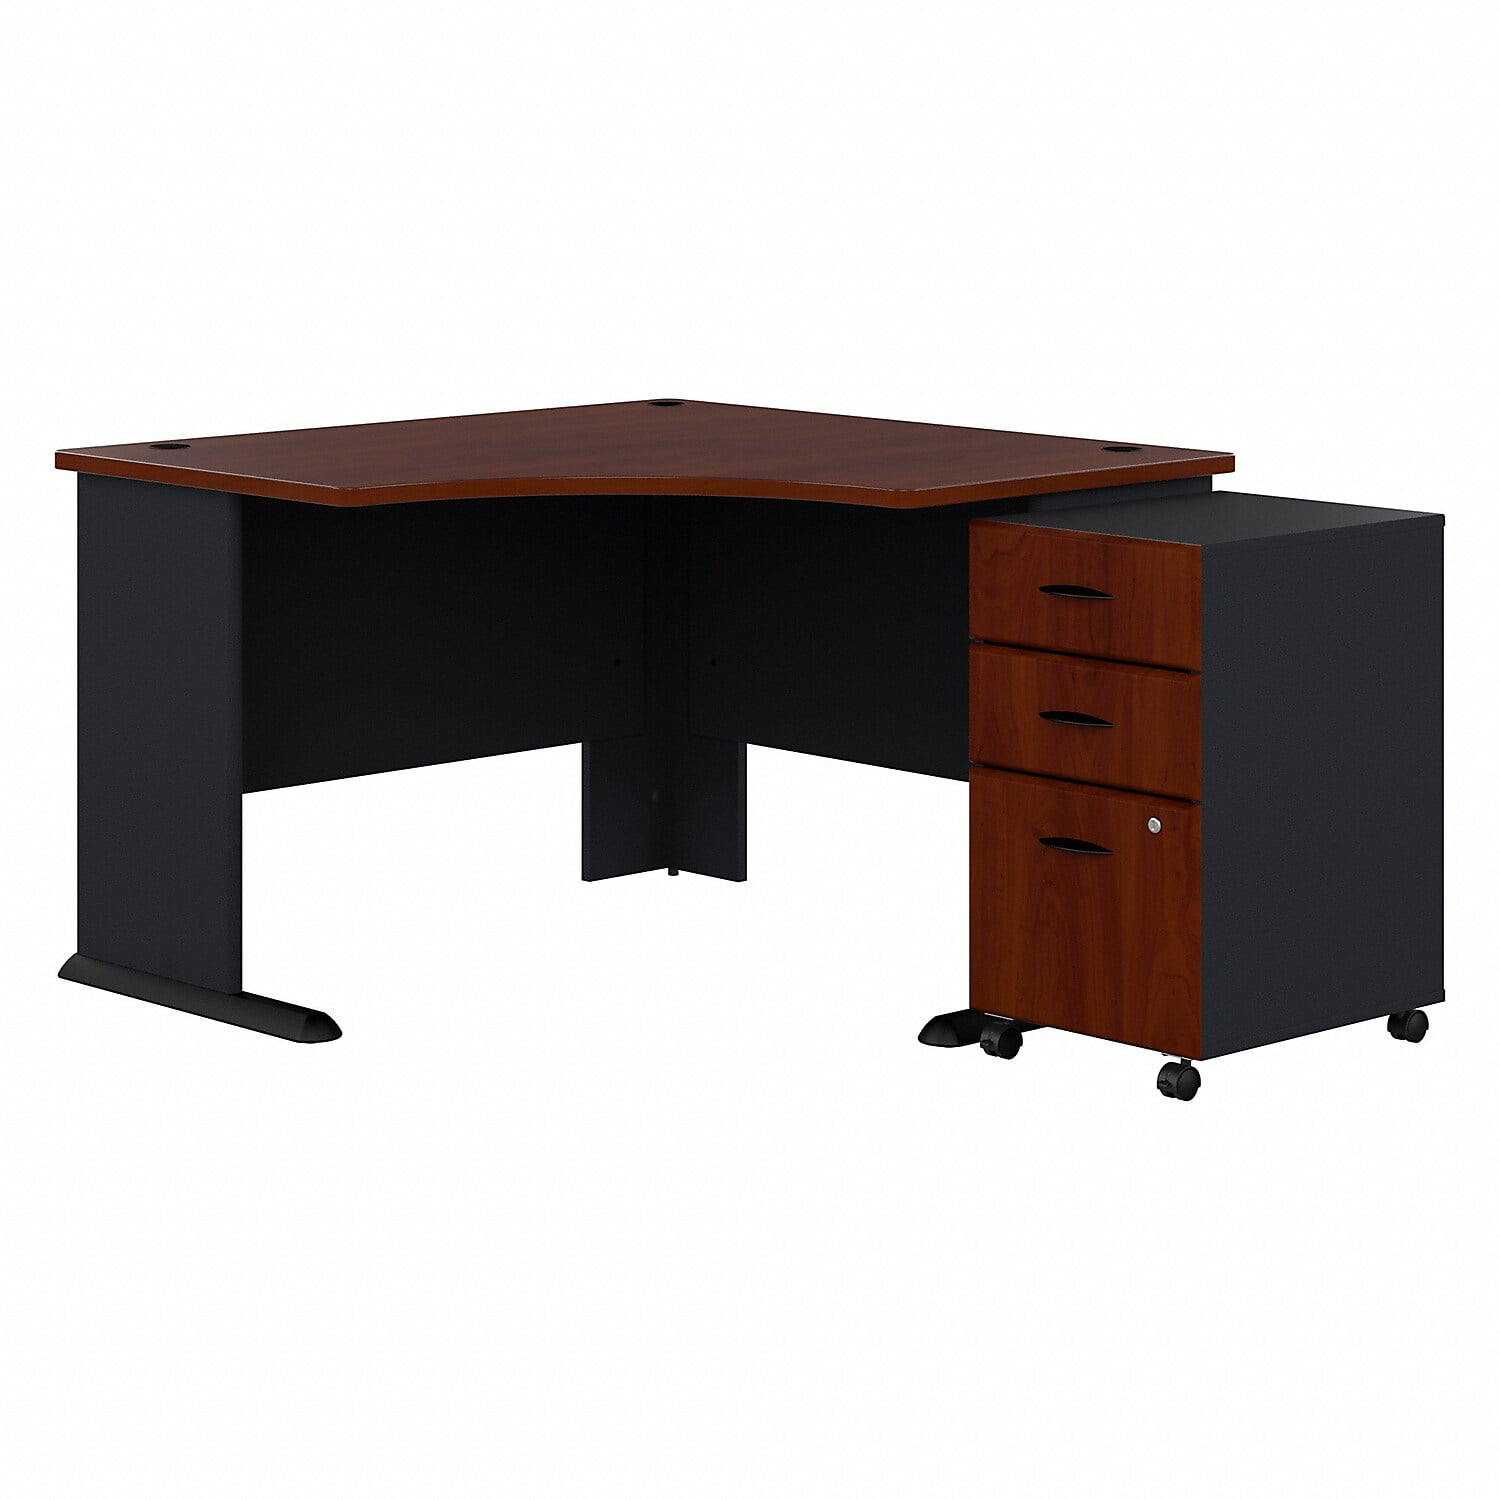 48 in. Series A Corner Desk with Mobile File Cabinet - Hansen Cherry -  SeatSolutions, SE2204594